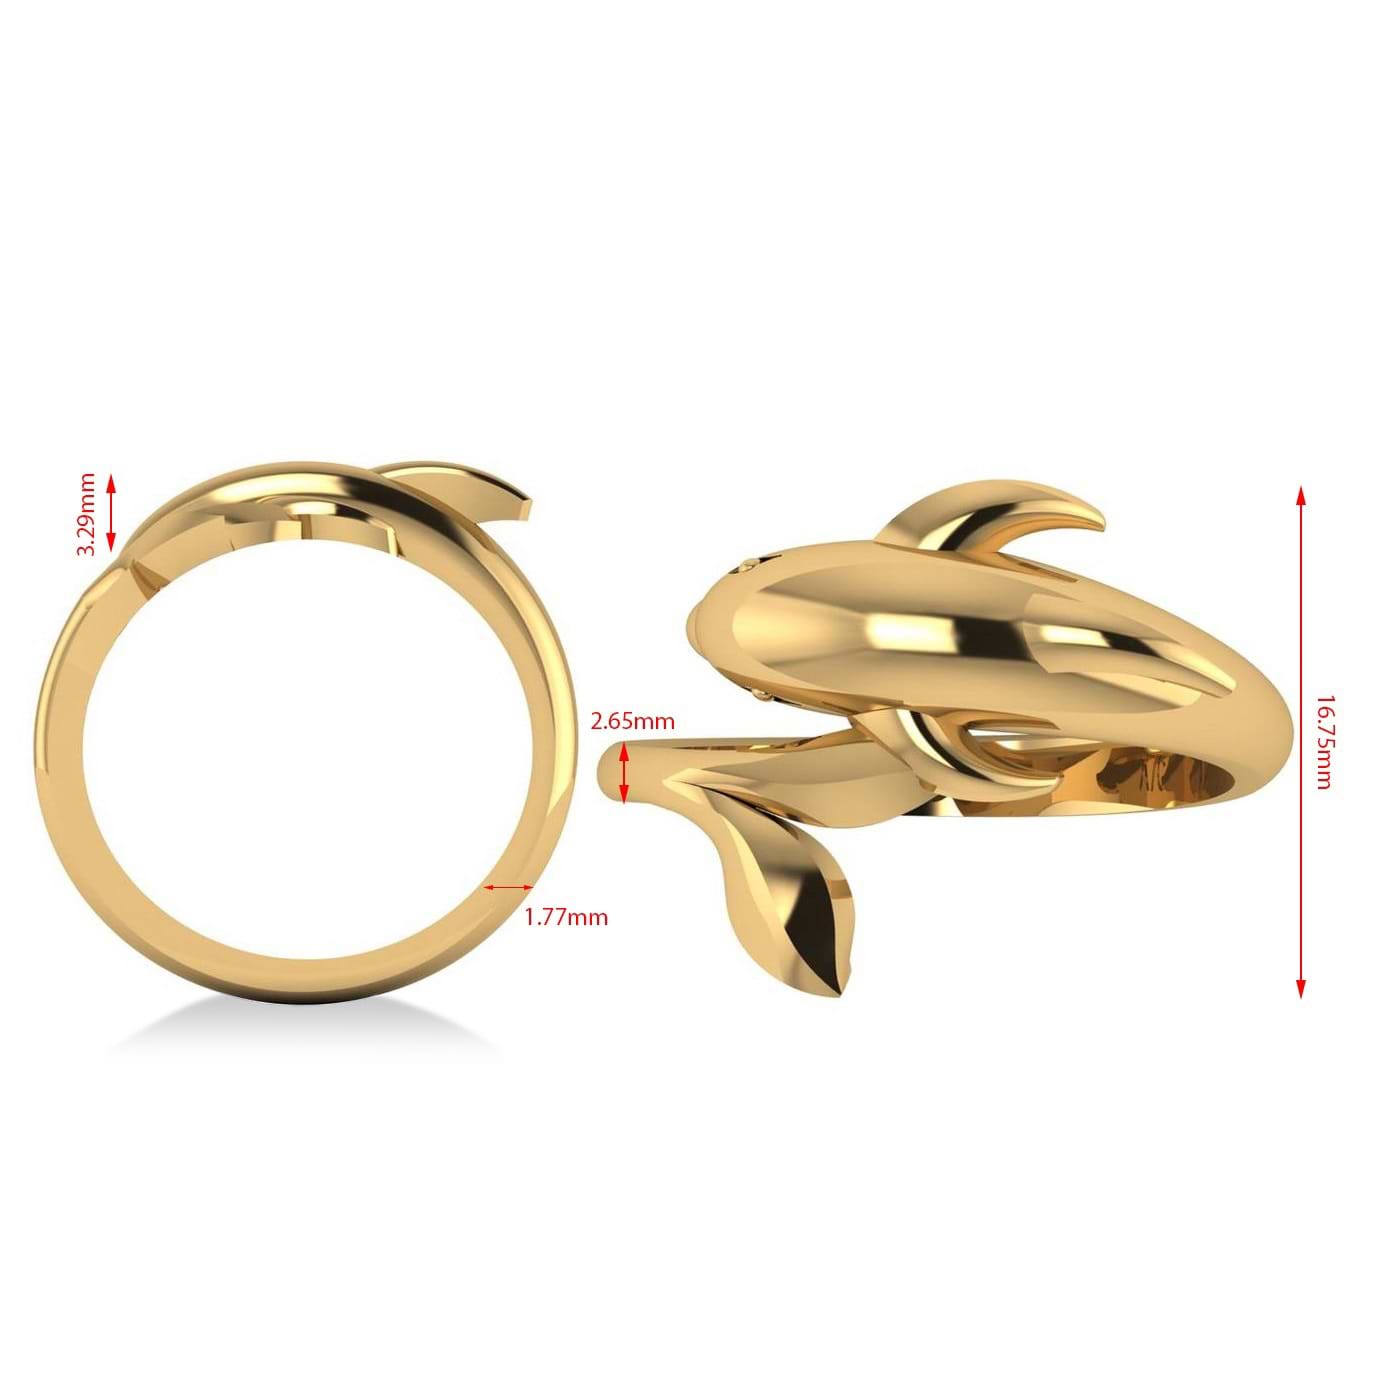 Summertime Dolphin Fashion Ring 14k Yellow Gold